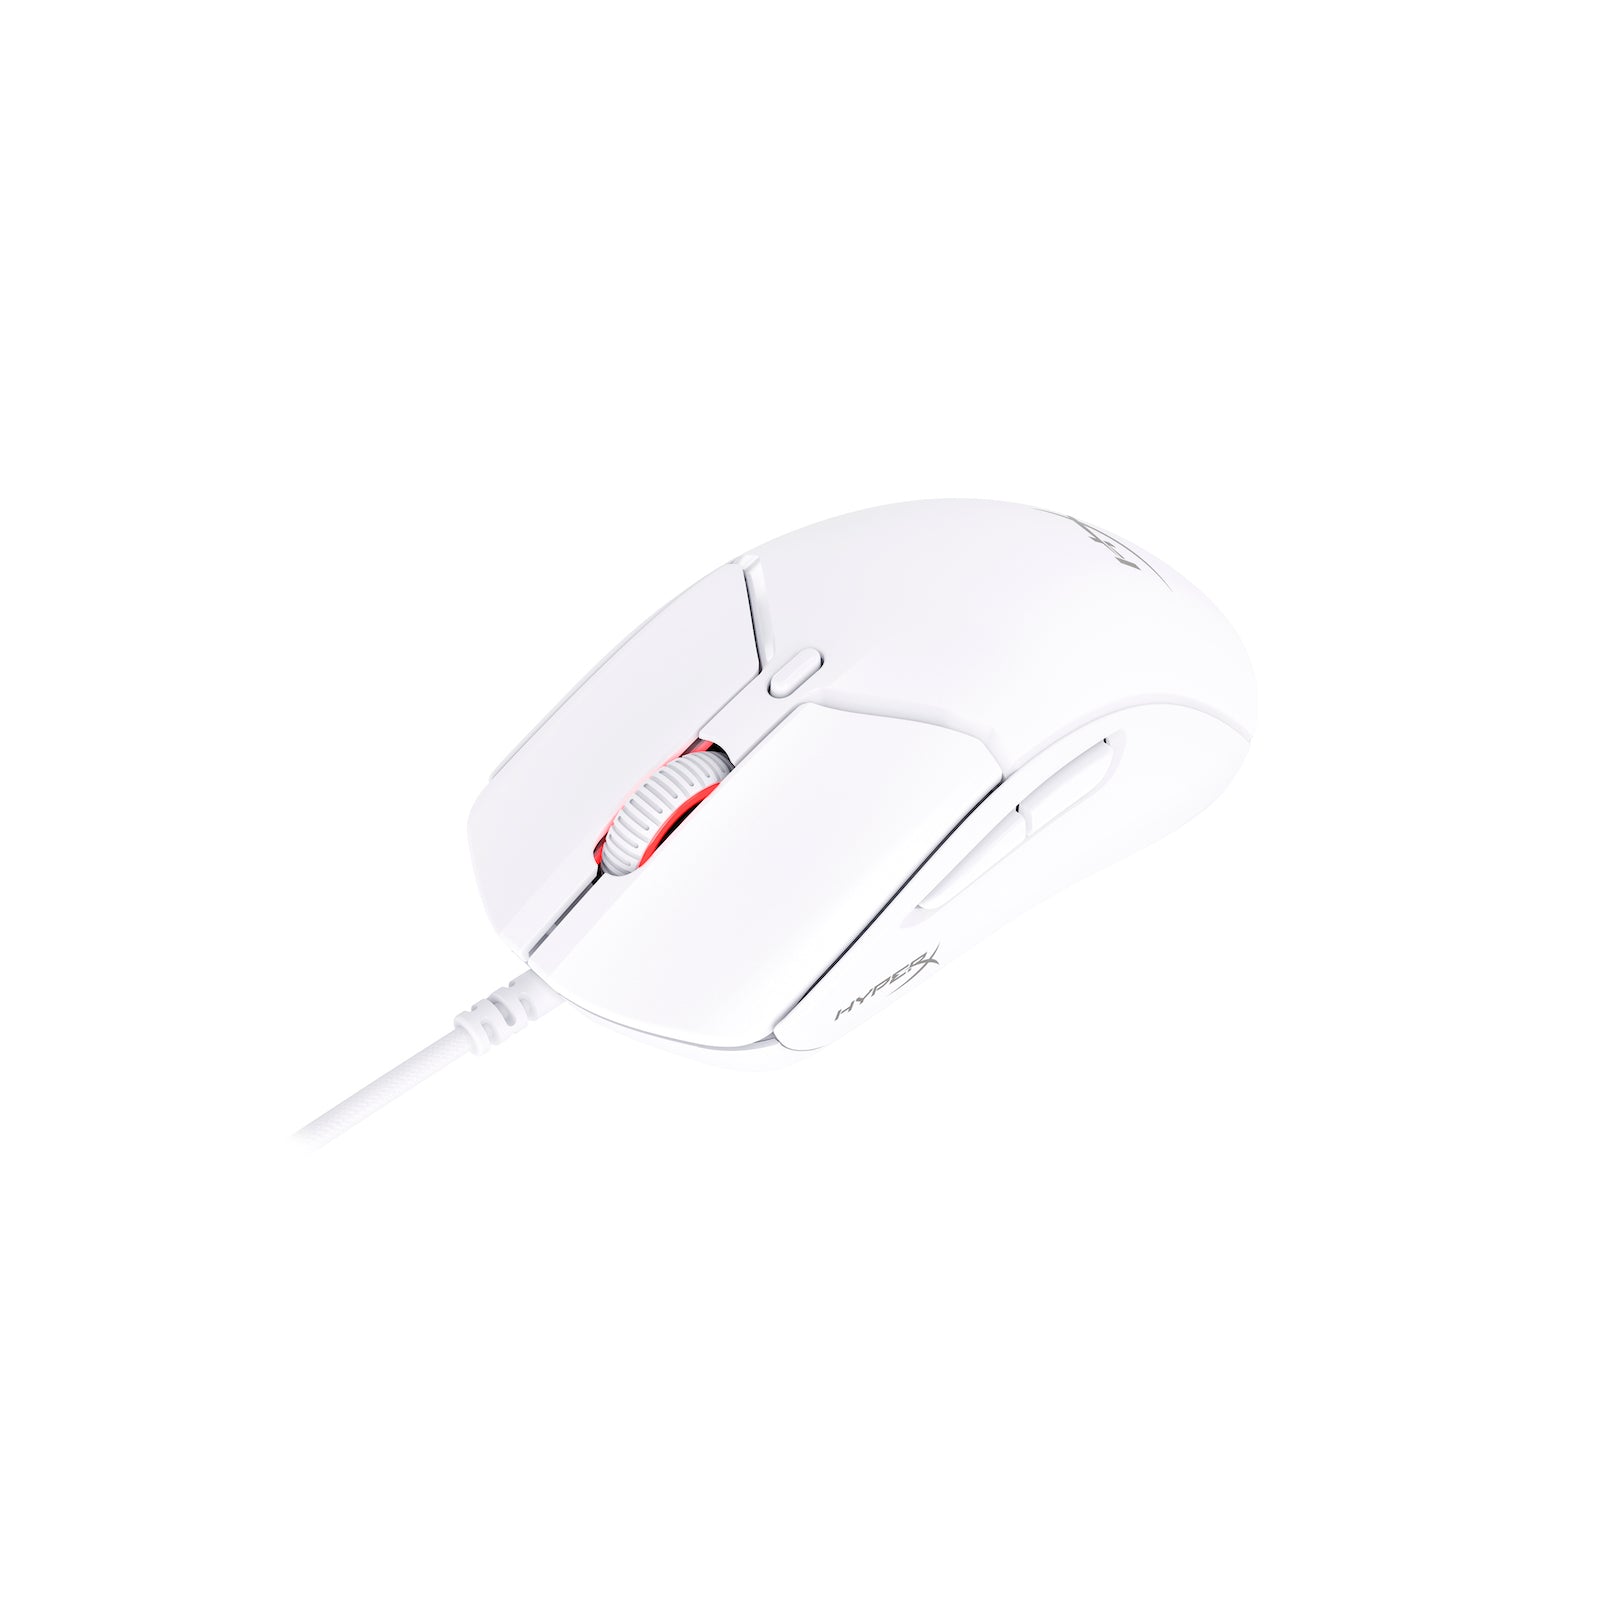 HyperX Pulsefire Haste 2 White Gaming Mouse Front View